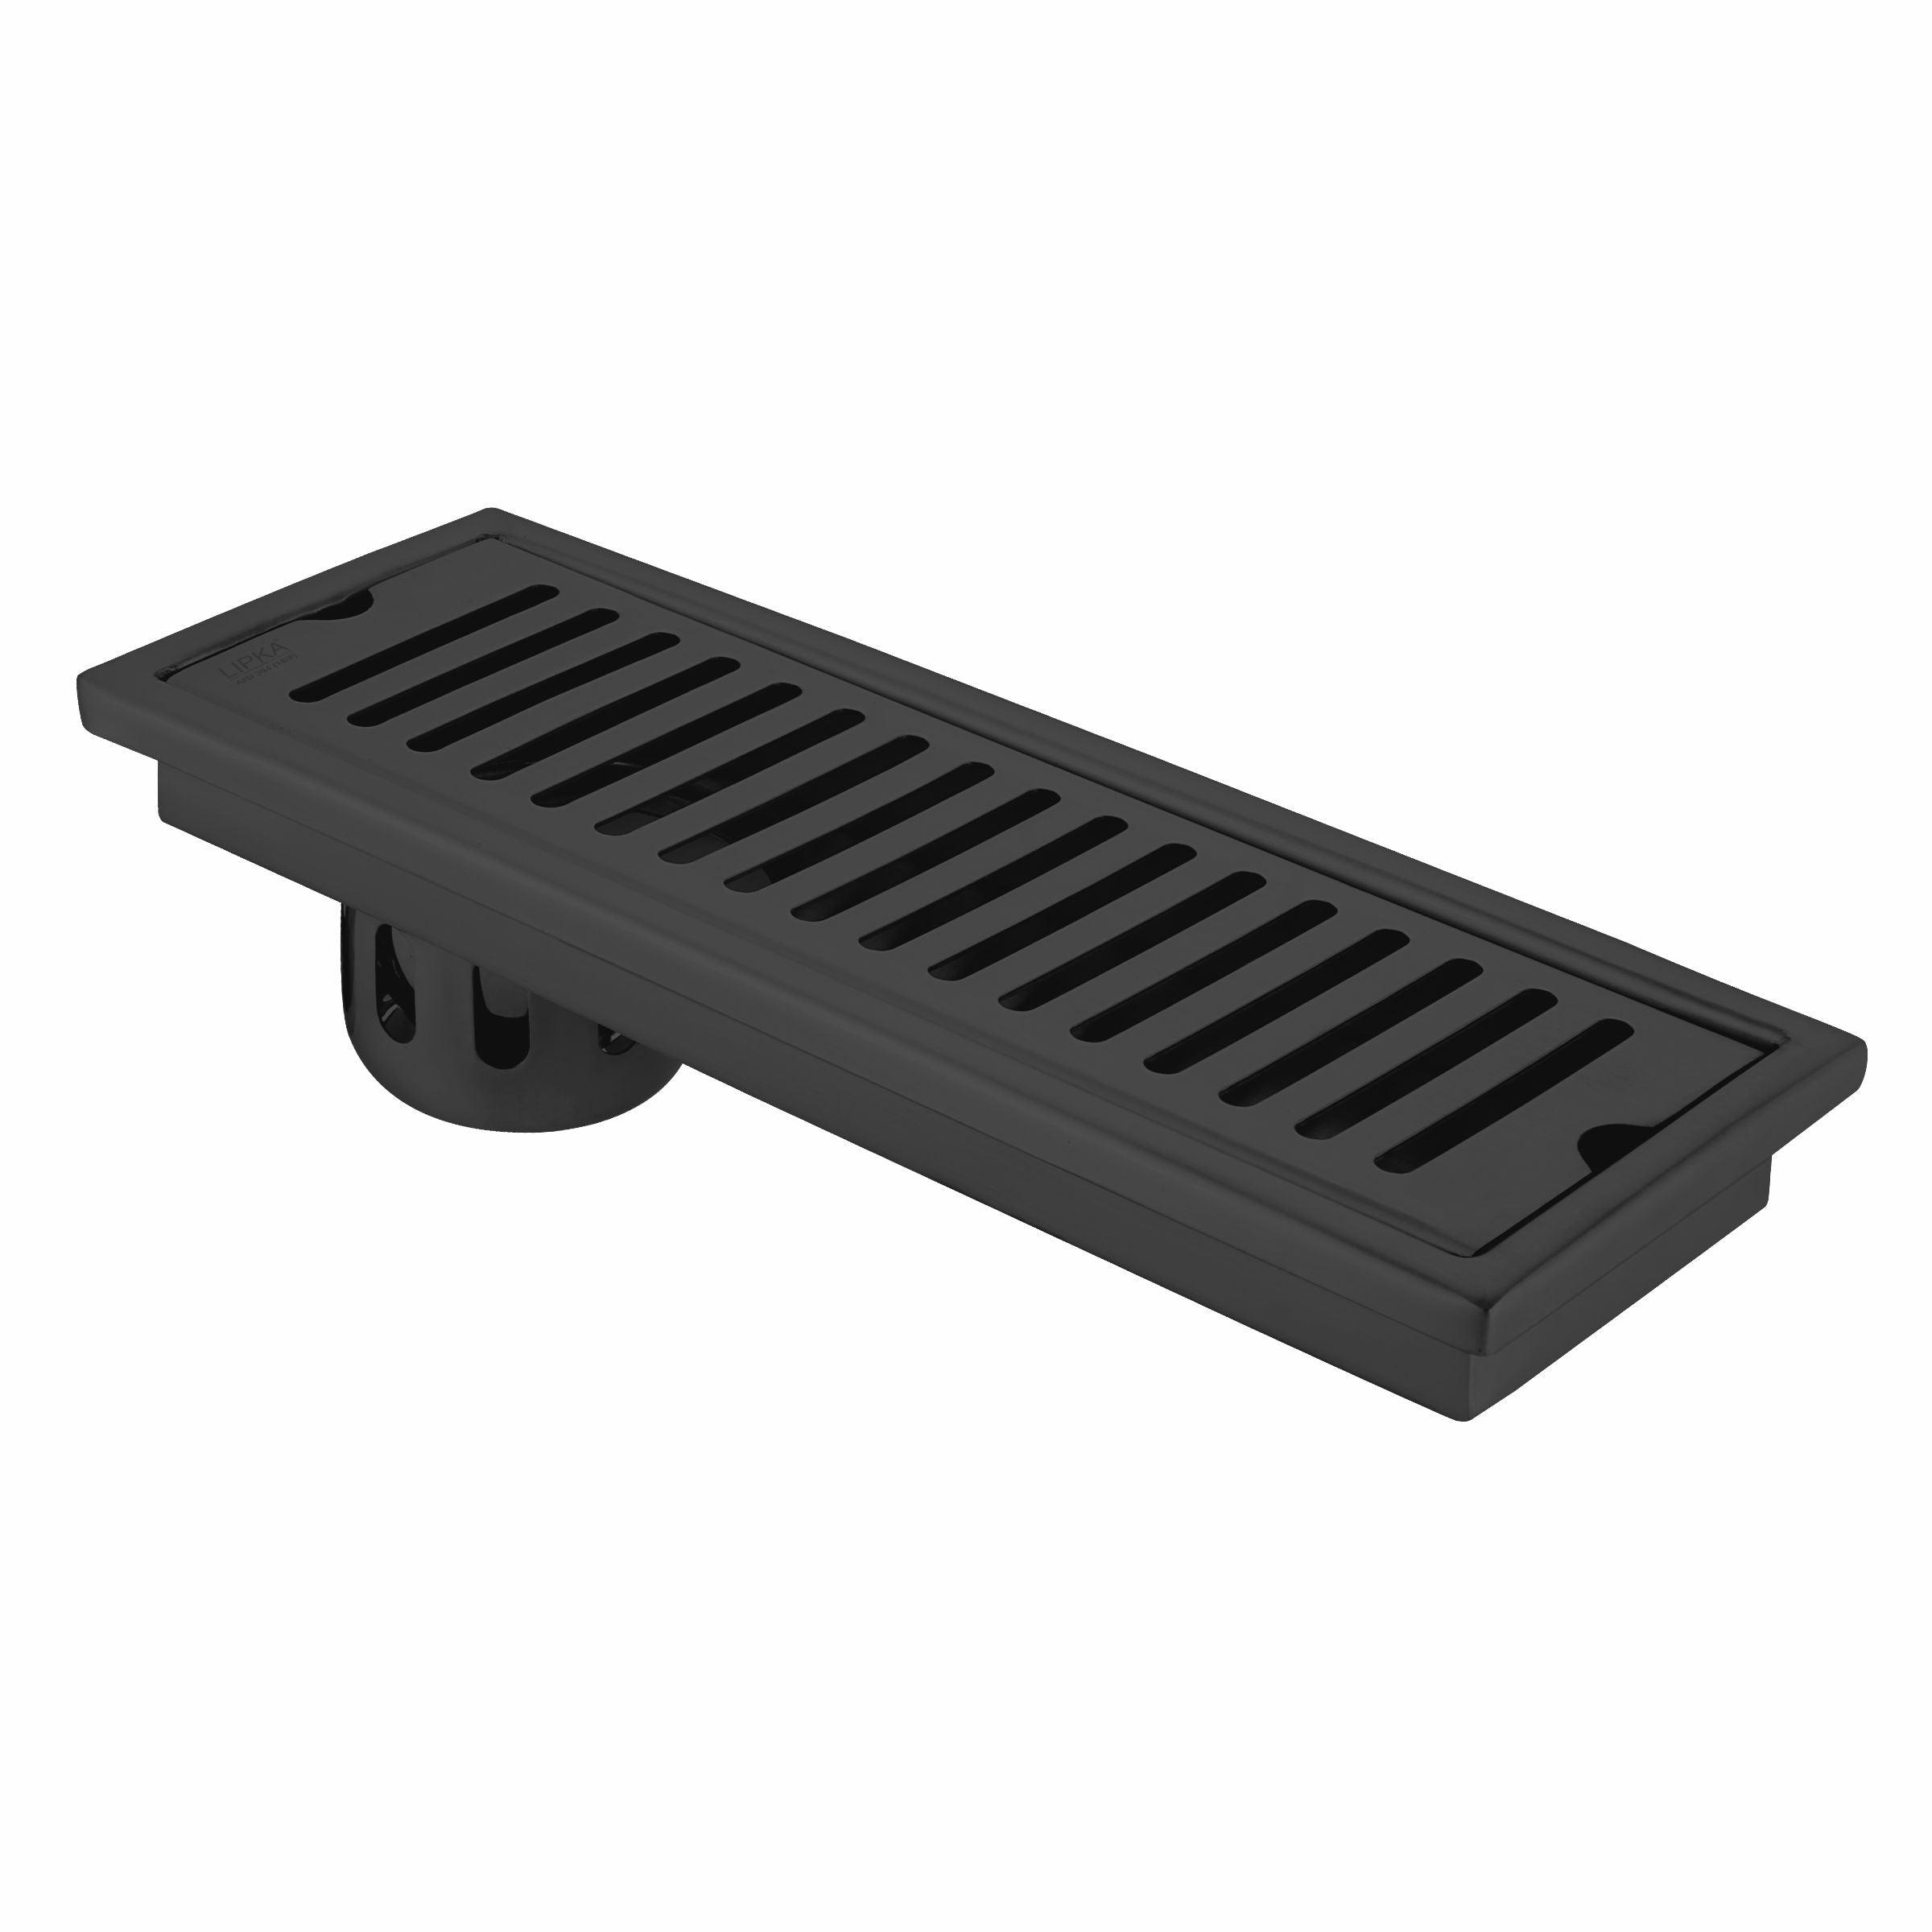 Vertical Shower Drain Channel - Black (18 x 5 Inches)